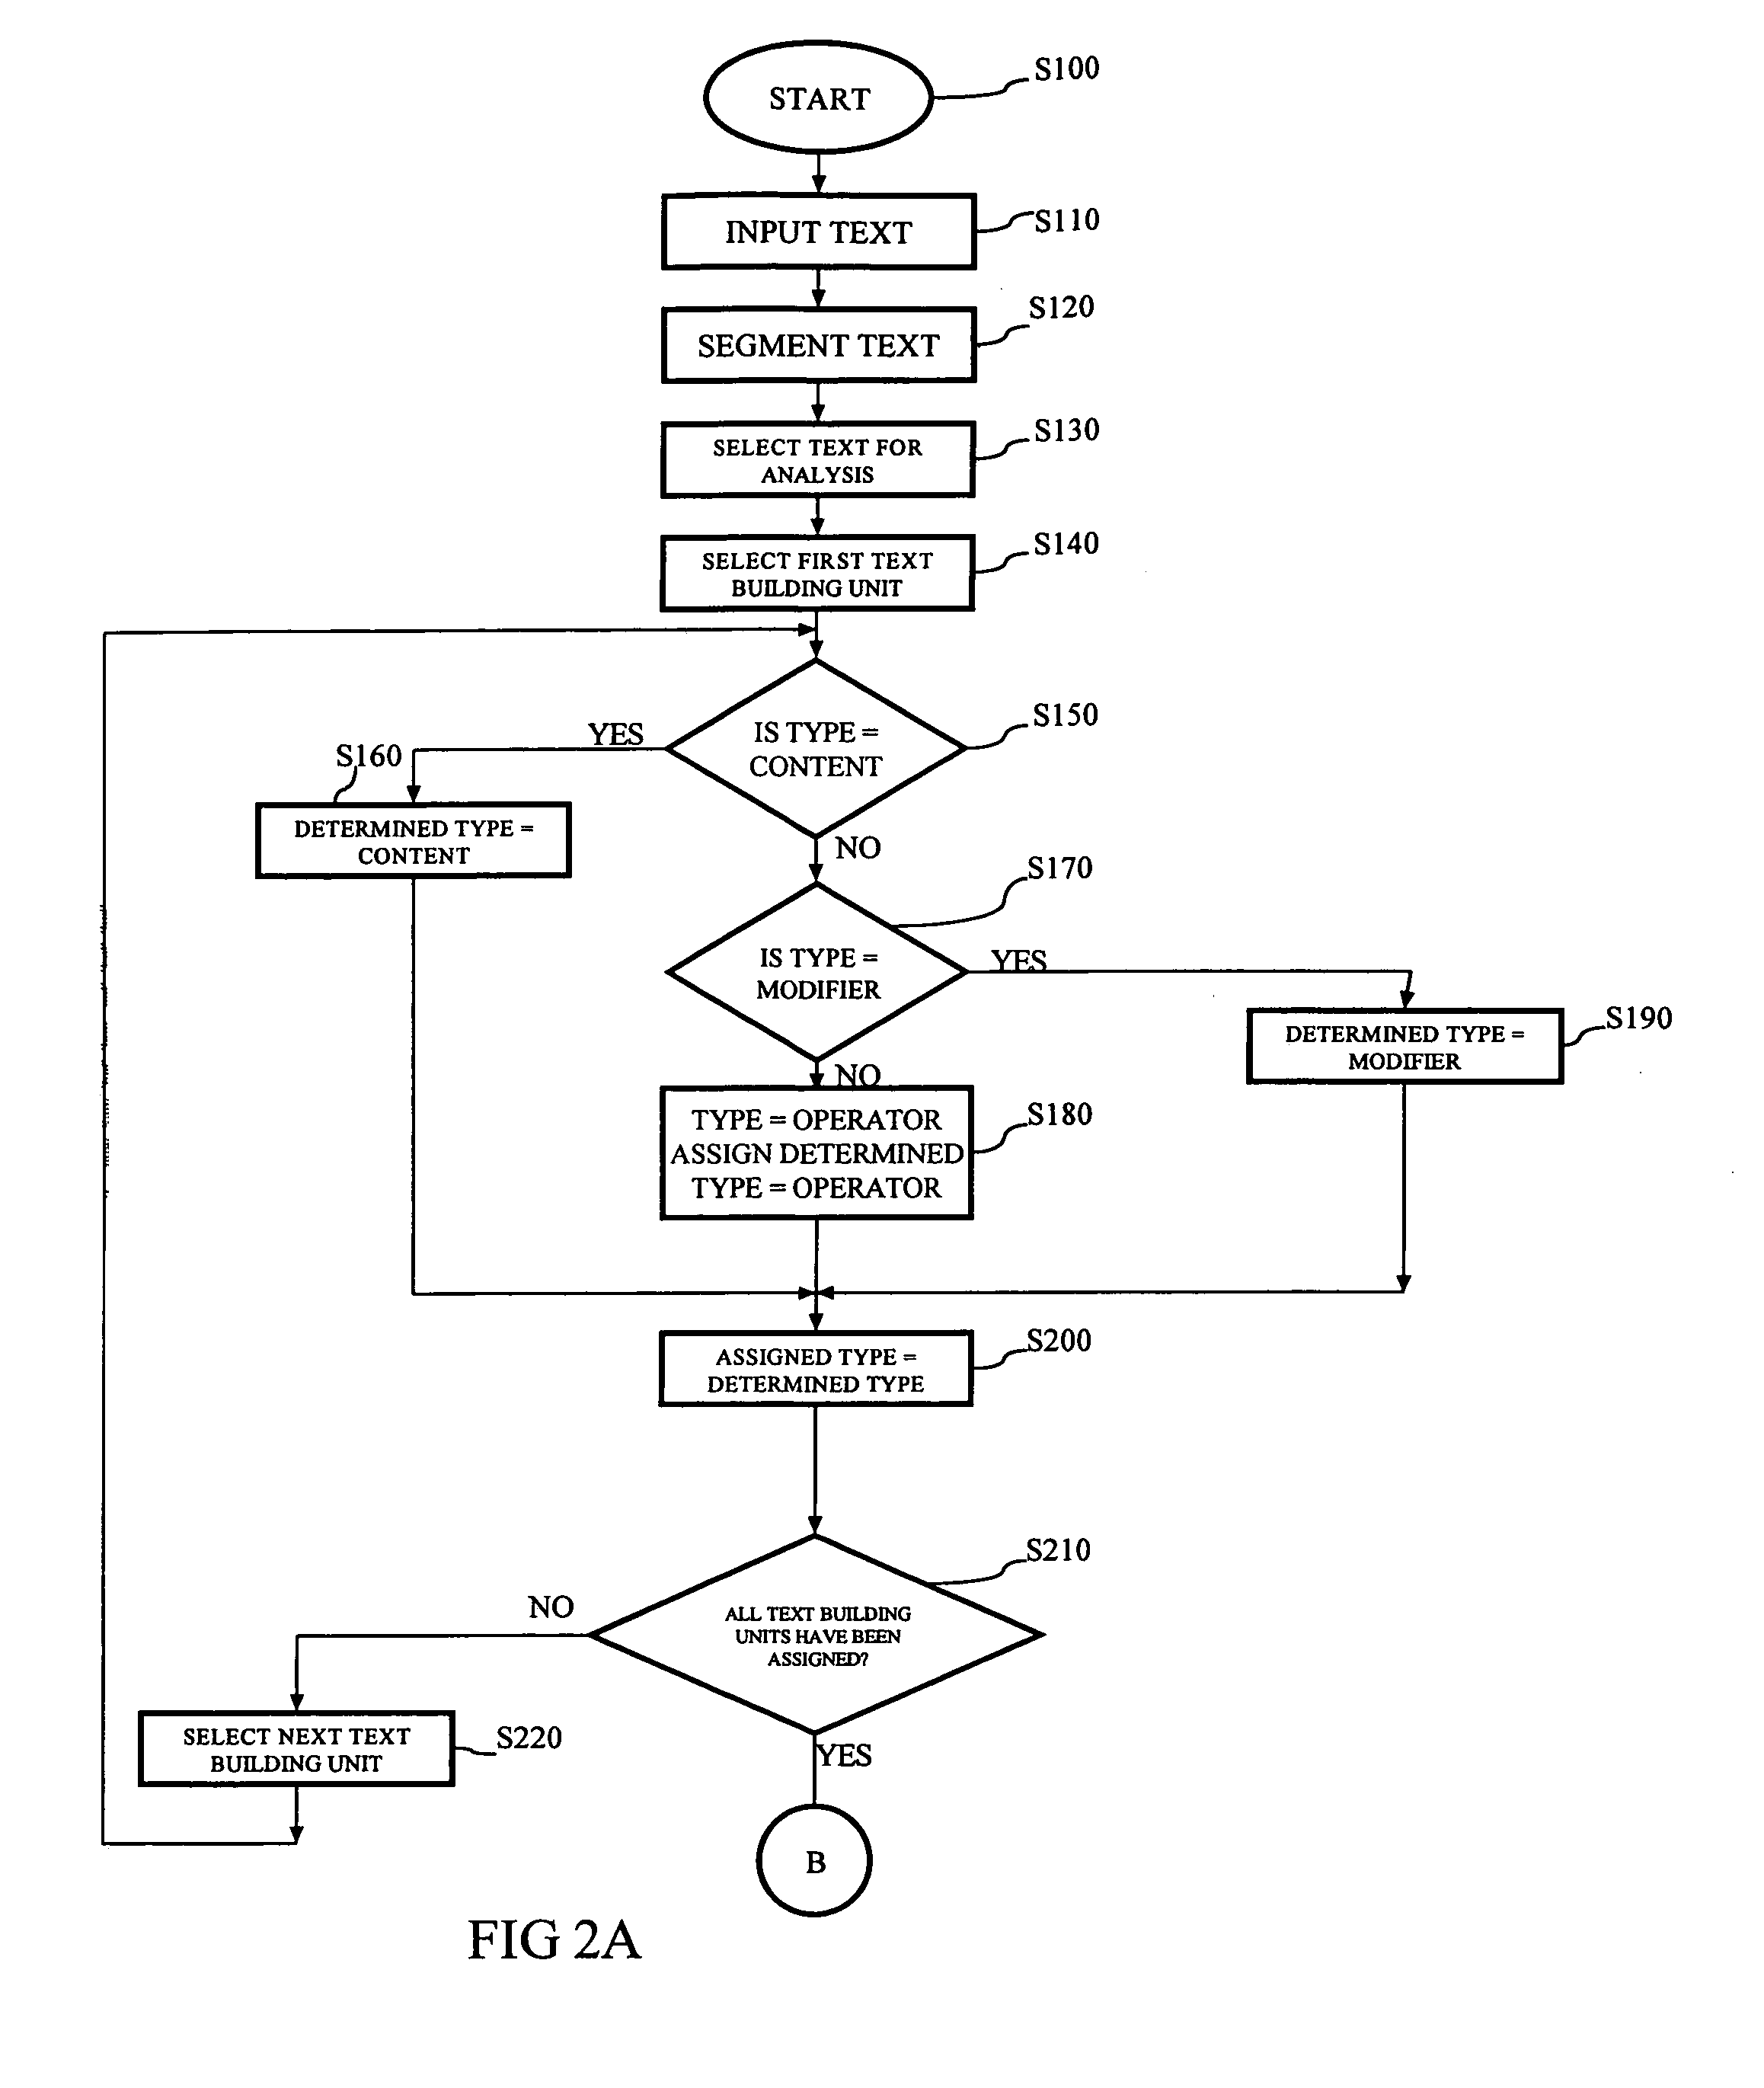 System and method for writing analysis using the linguistic discourse model